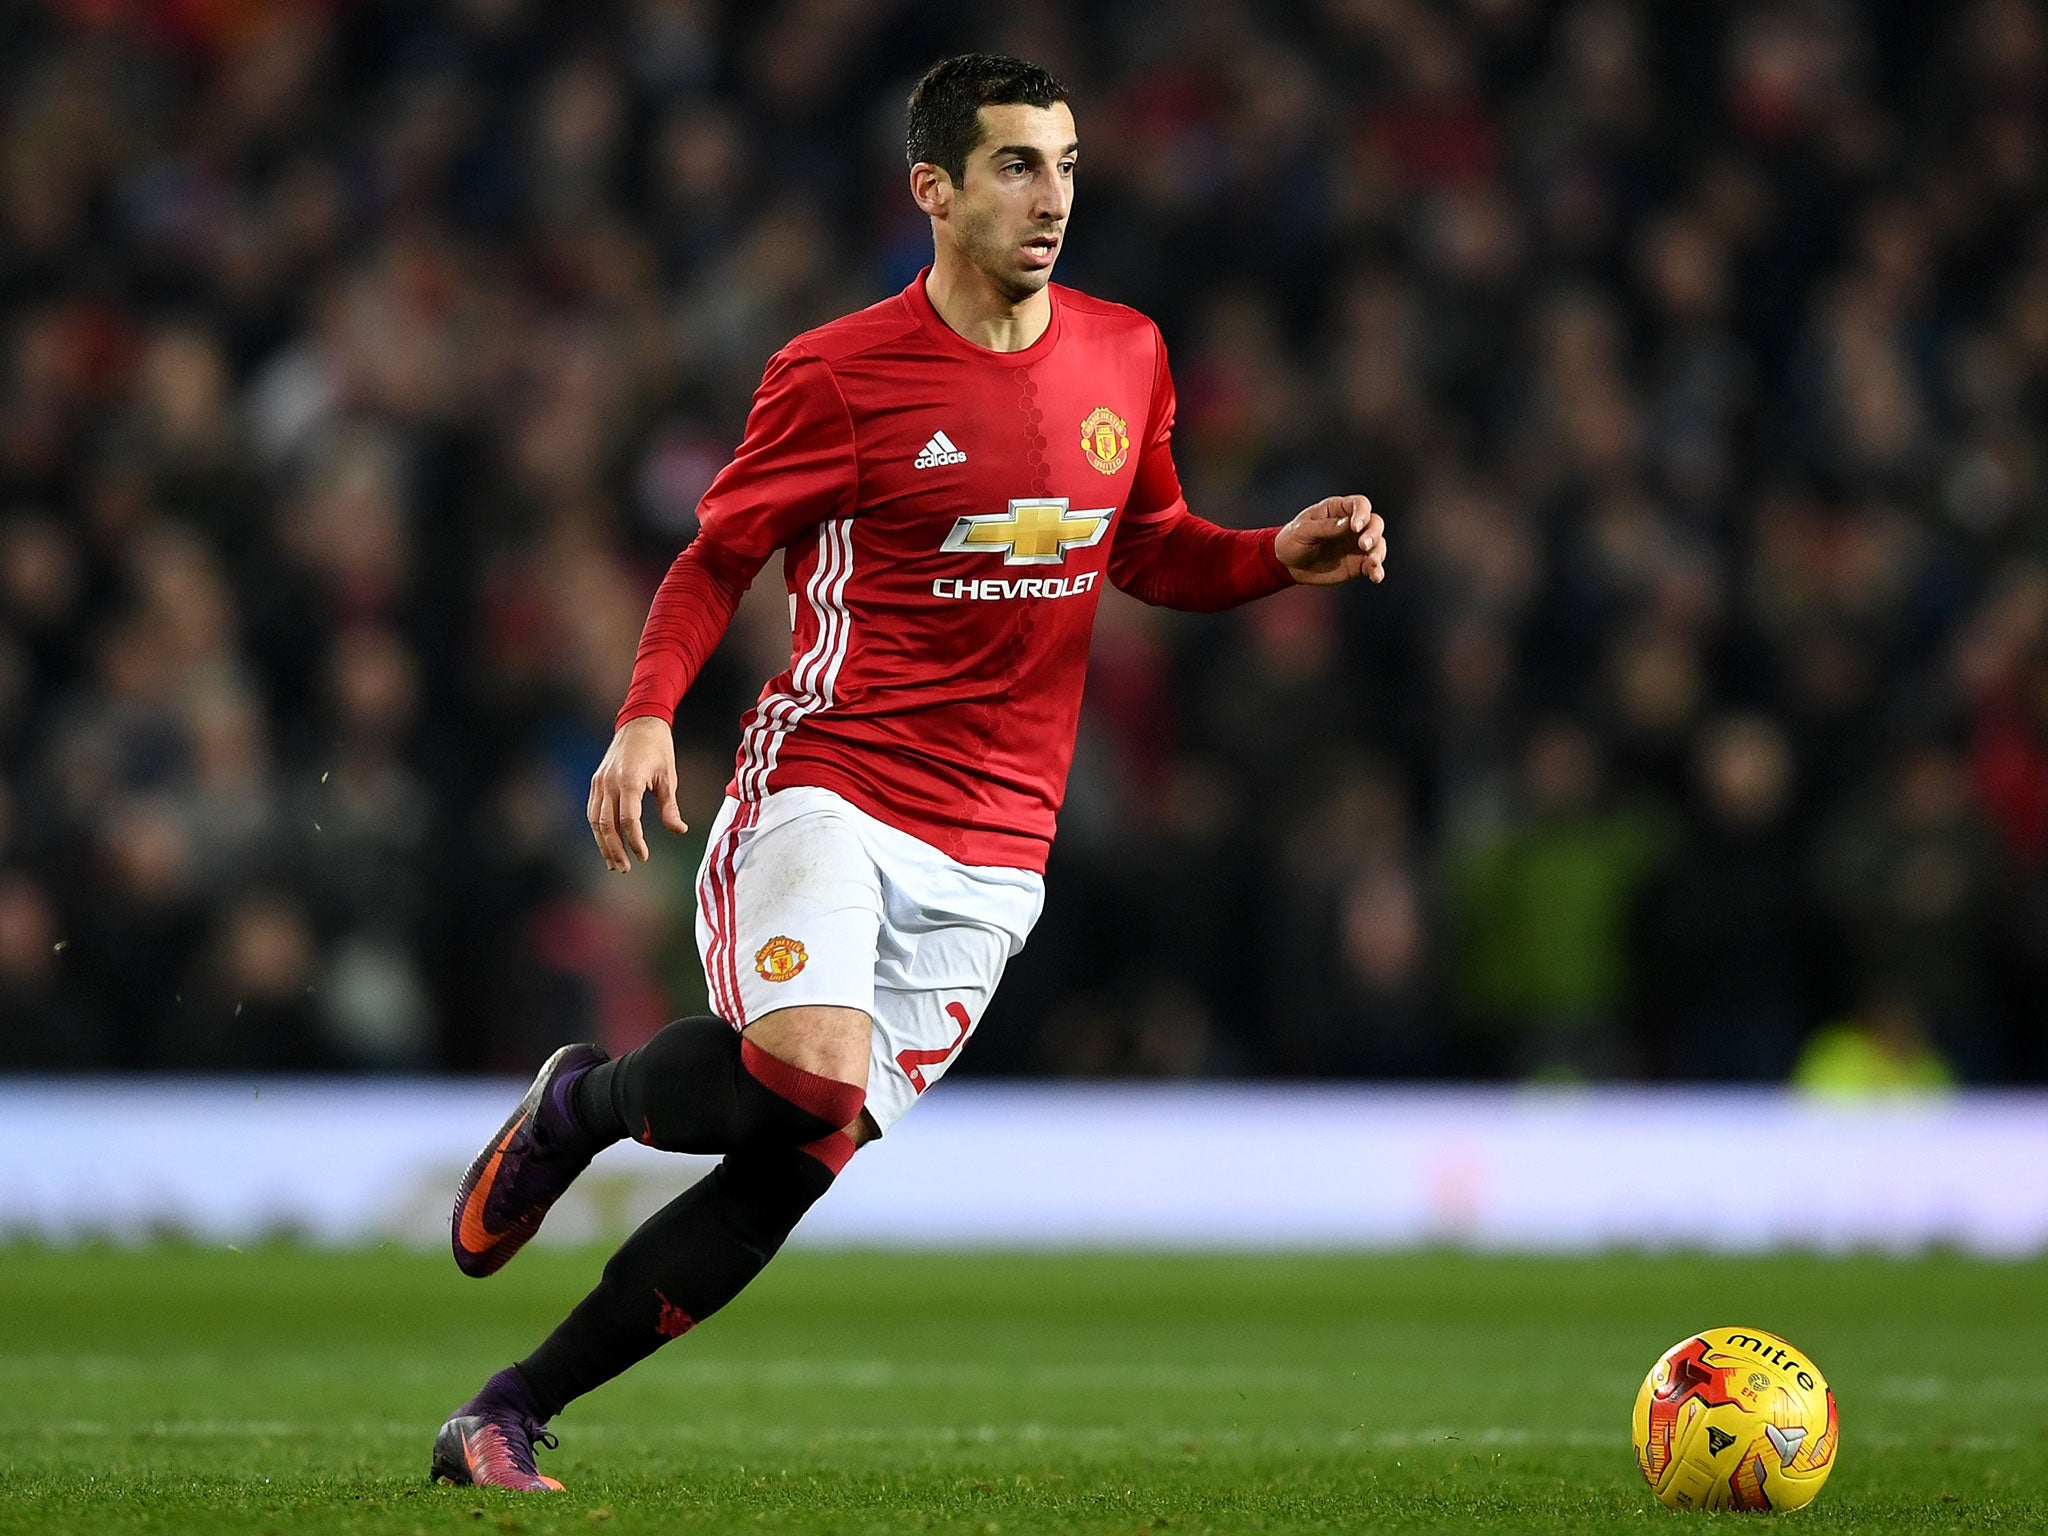 Henrikh Mkhitaryan has written an insightful account of how his father inspired him to be a footballer